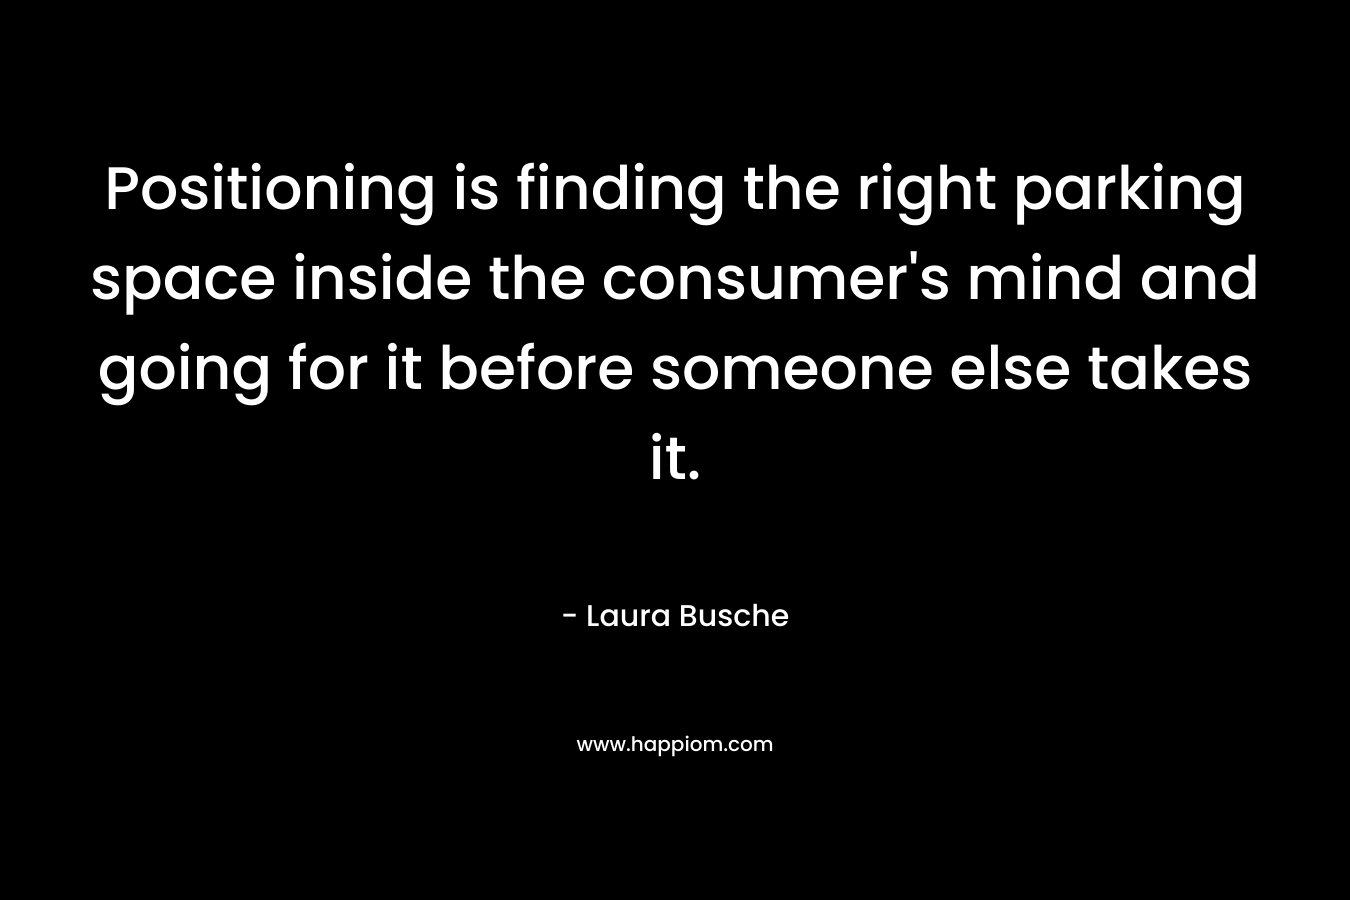 Positioning is finding the right parking space inside the consumer's mind and going for it before someone else takes it.